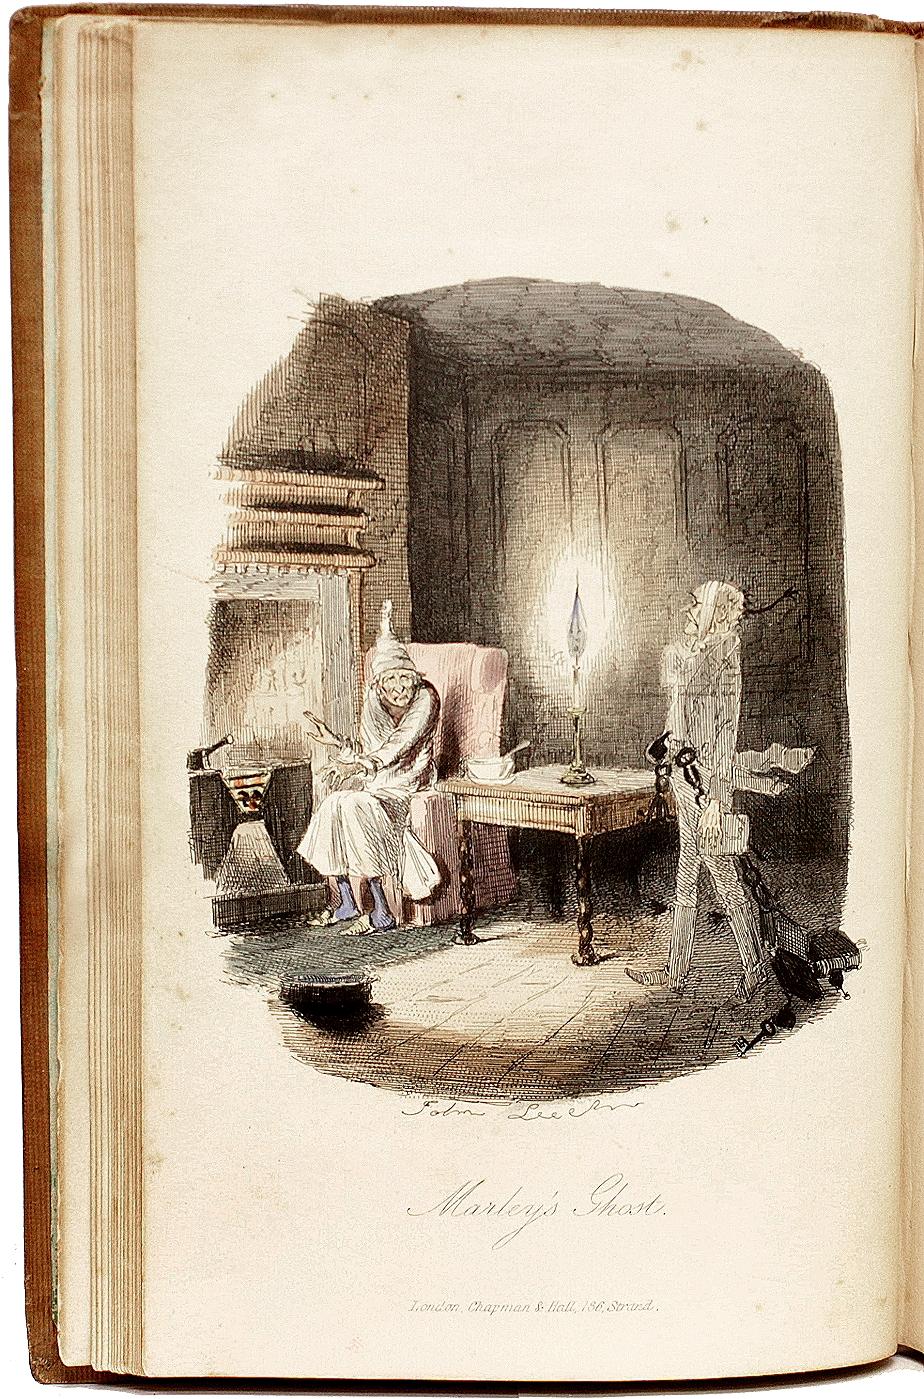 Mid-19th Century Charles DICKENS. A Christmas Carol. 1843 - FIRST EDITION FIRST ISSUE - IN CLOTH